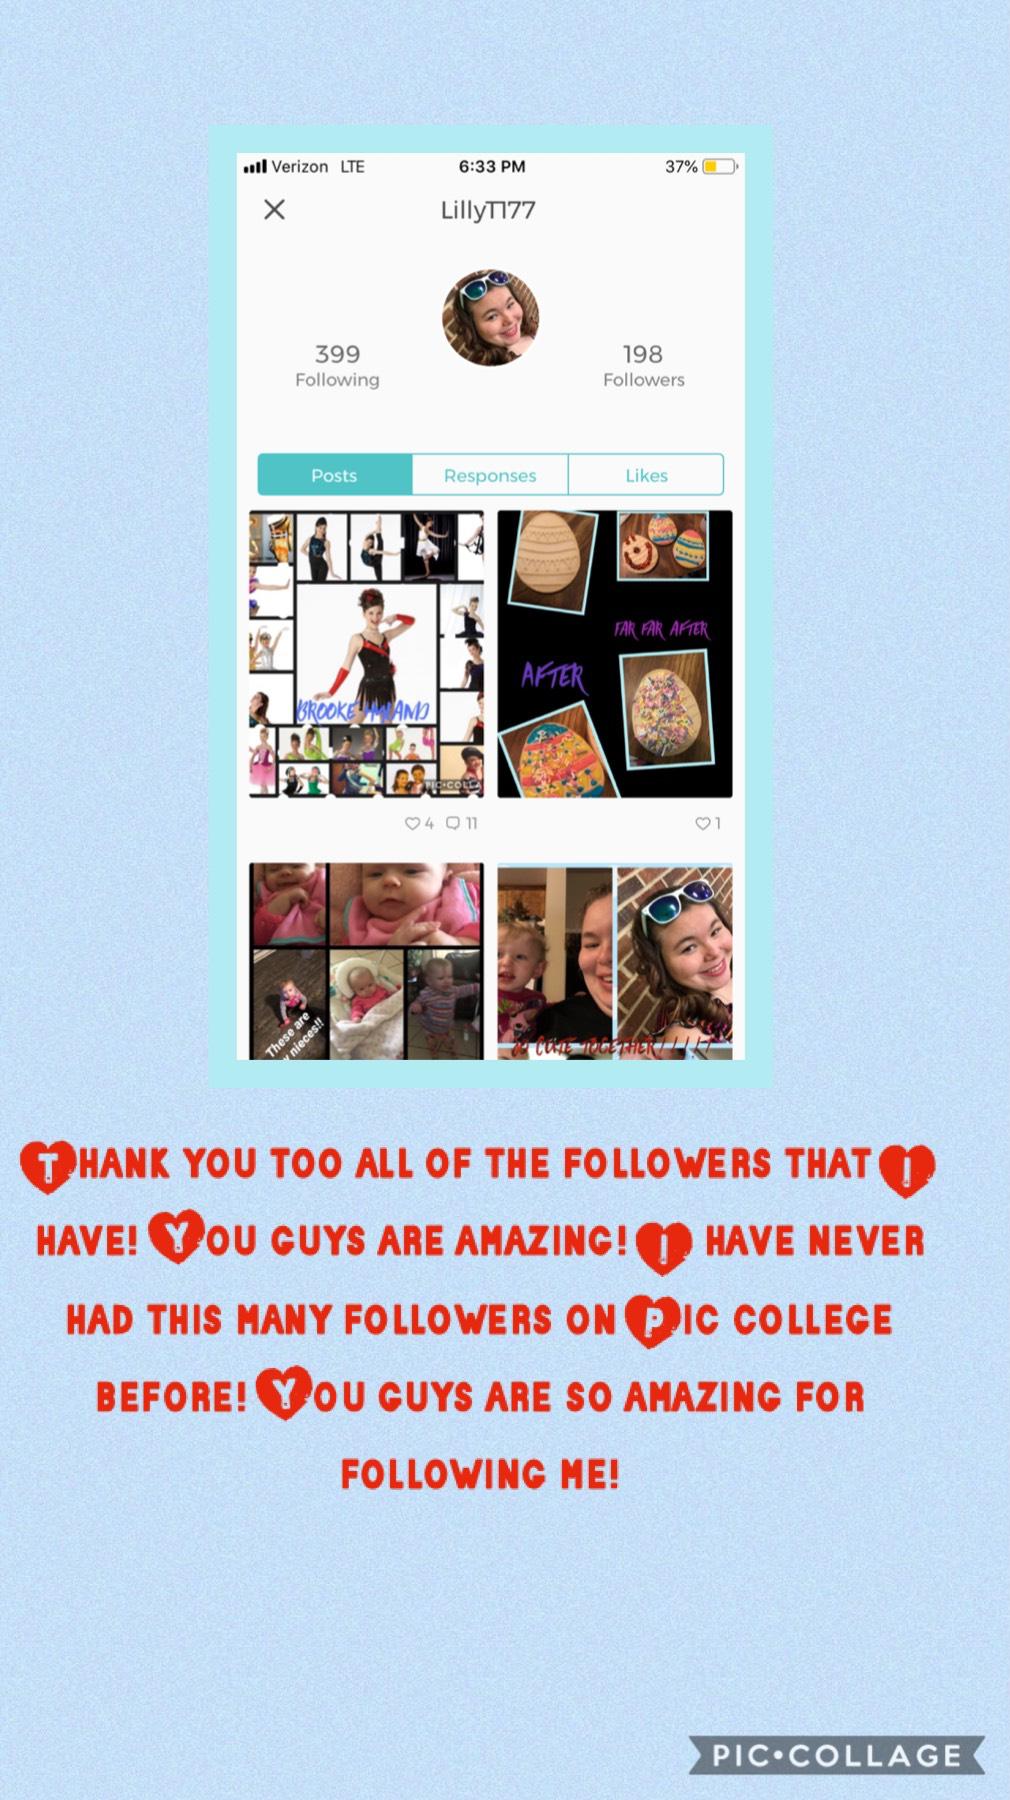 Thank you to all of my followers!